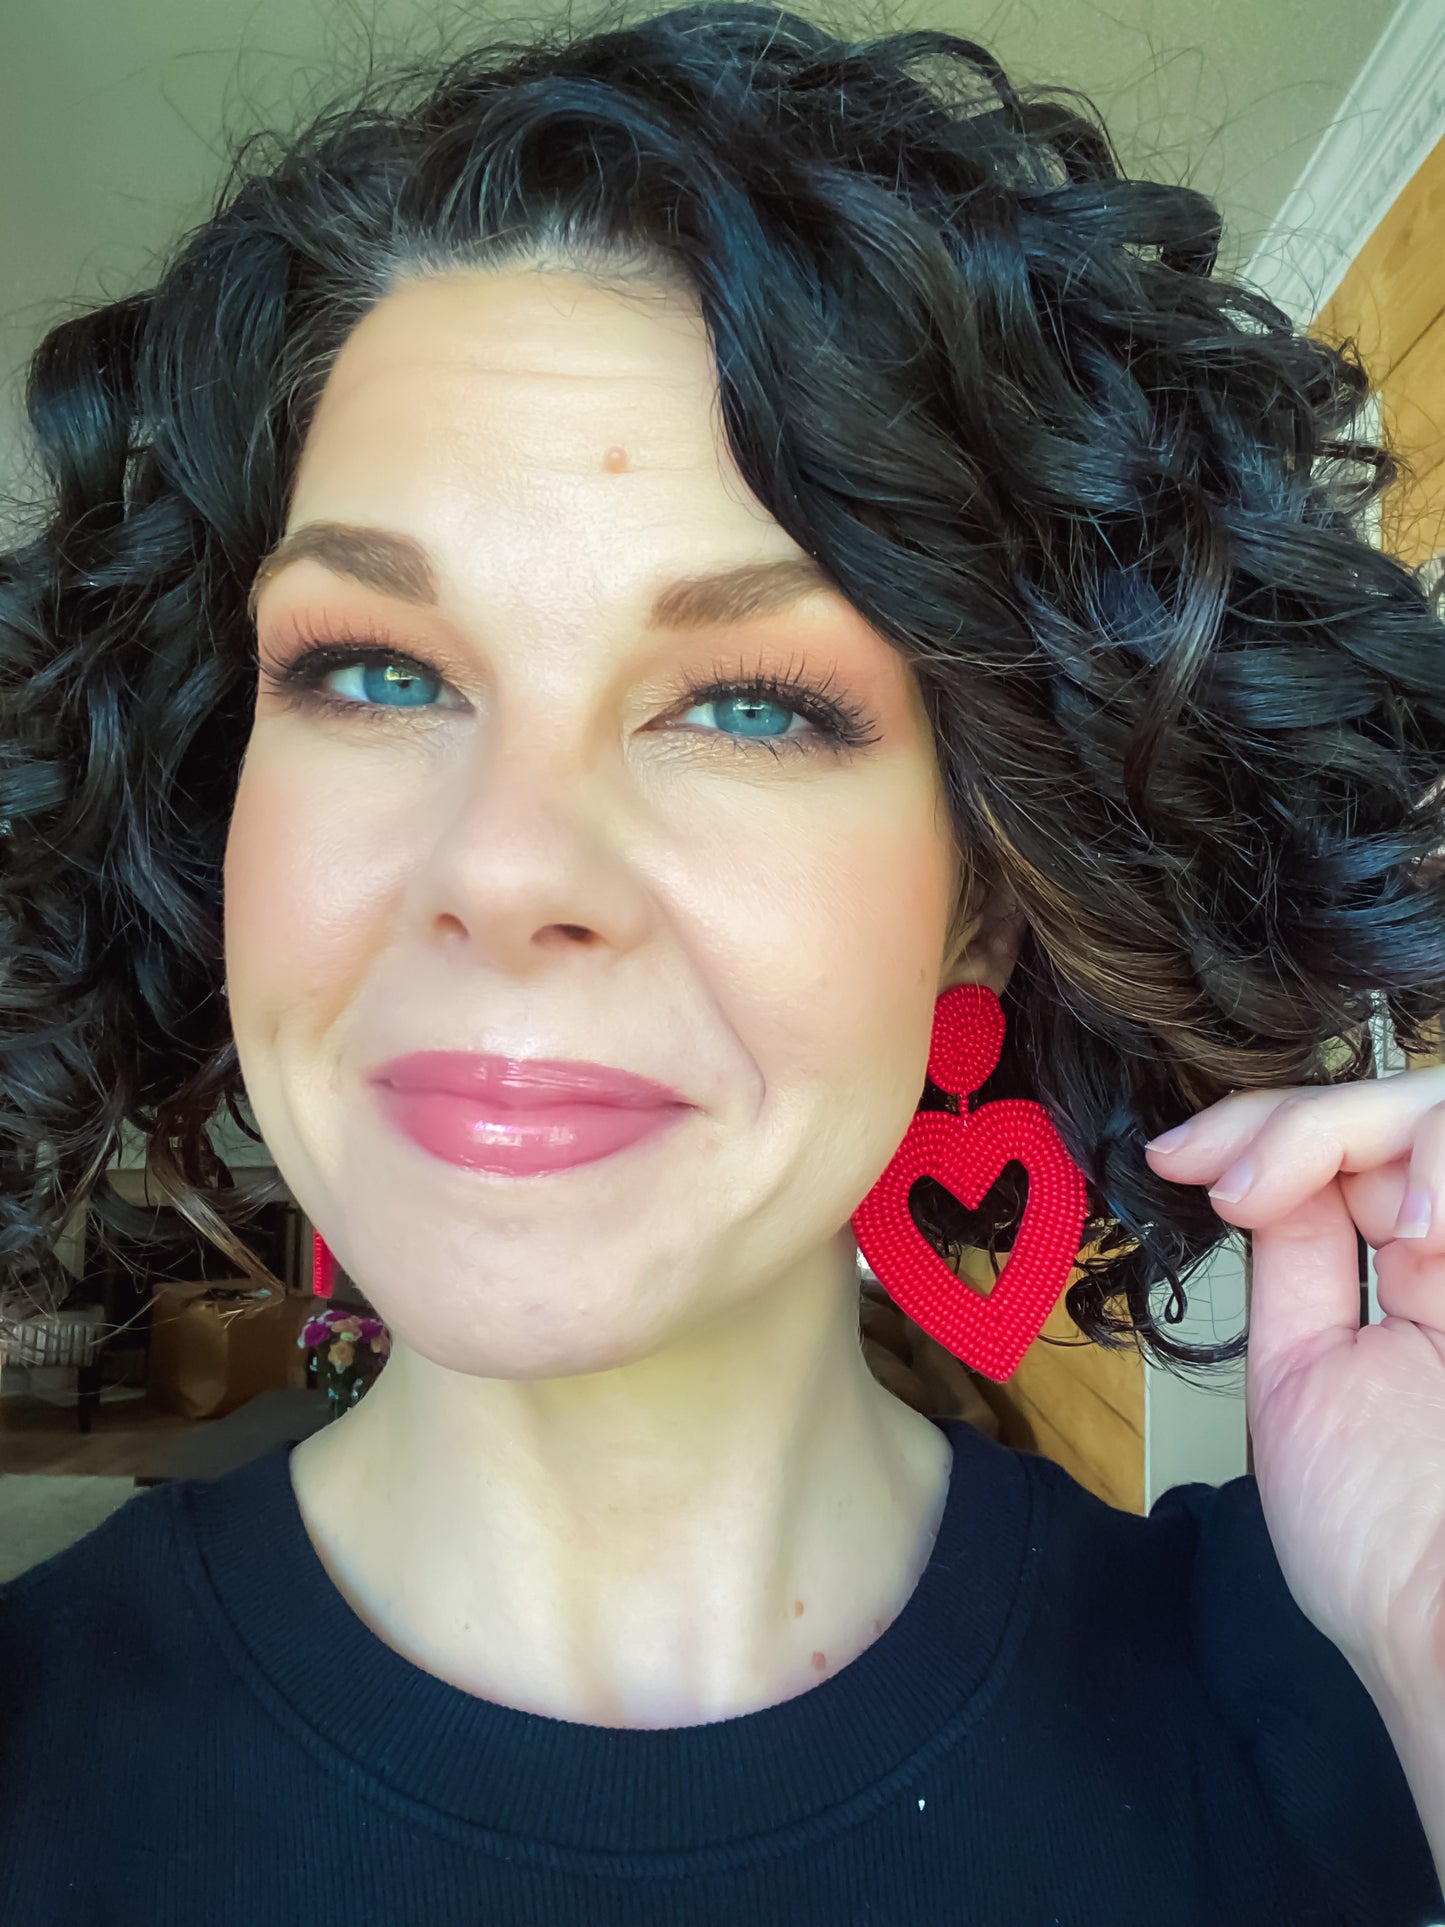 Be My Valentine Heart Beaded Earrings - 3 colors